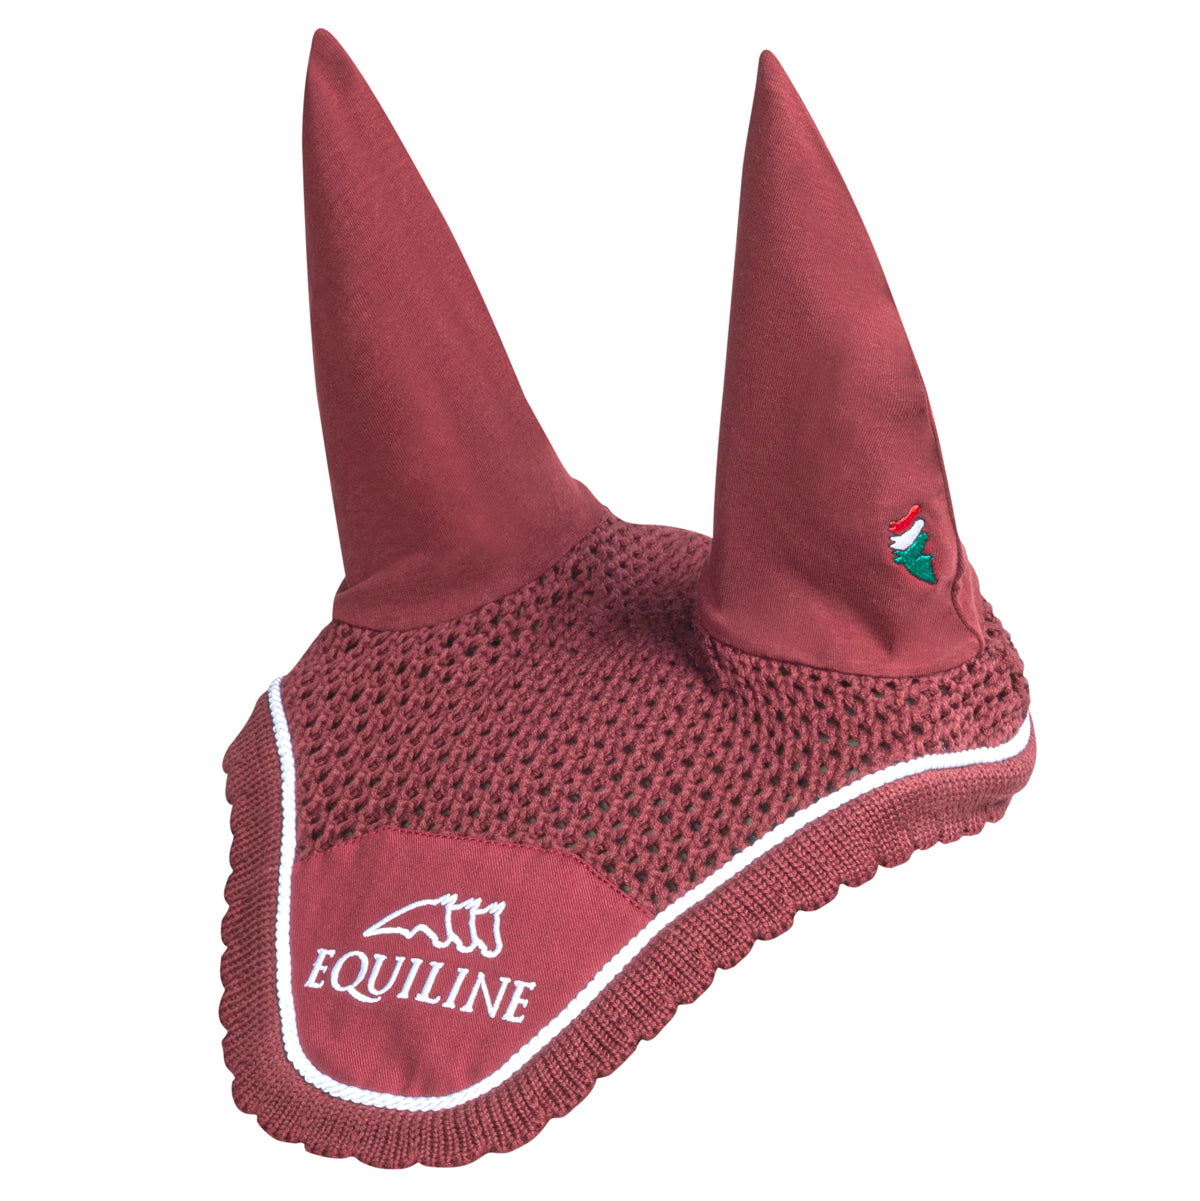 The Equiline fly veil in burgundy with white piping and a embroidered equiline logo on the front.